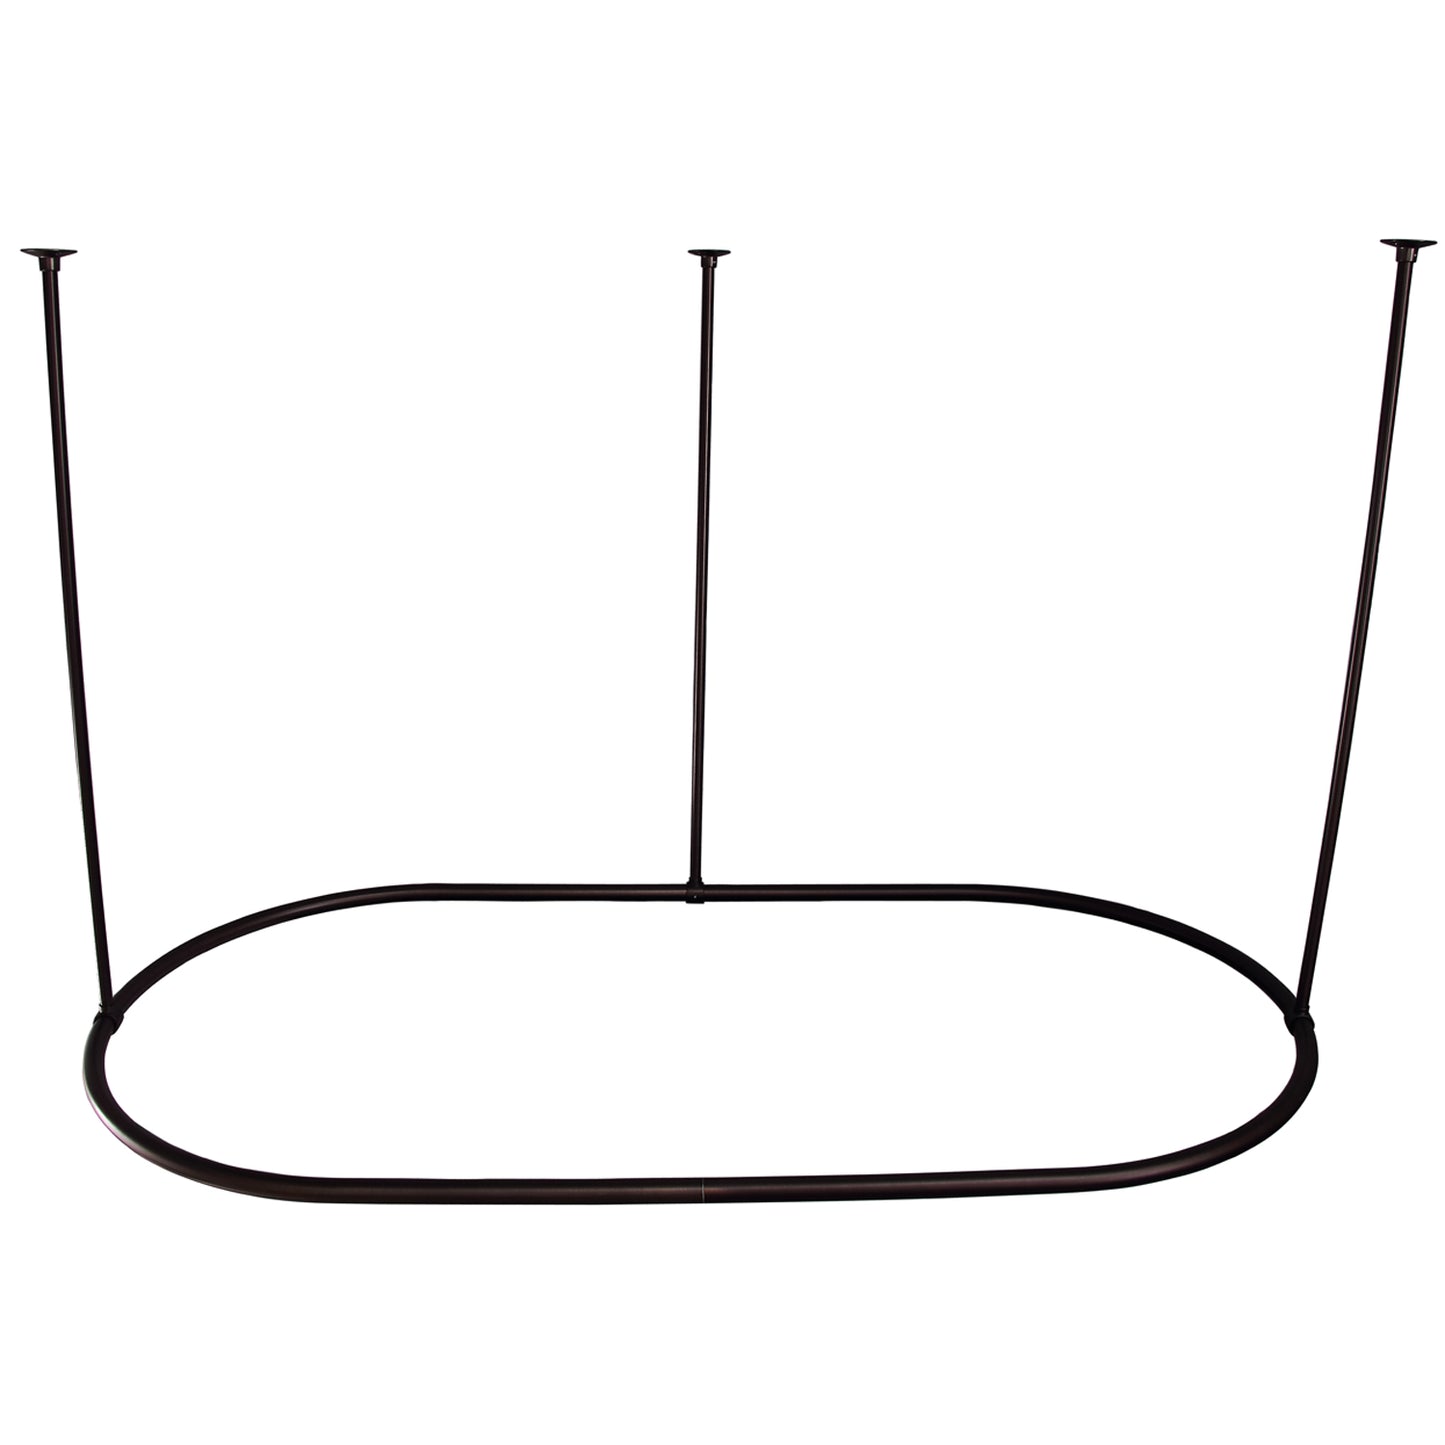 54" x 36" Oval Shower Curtain Ring in Oil Rubbed Bronze